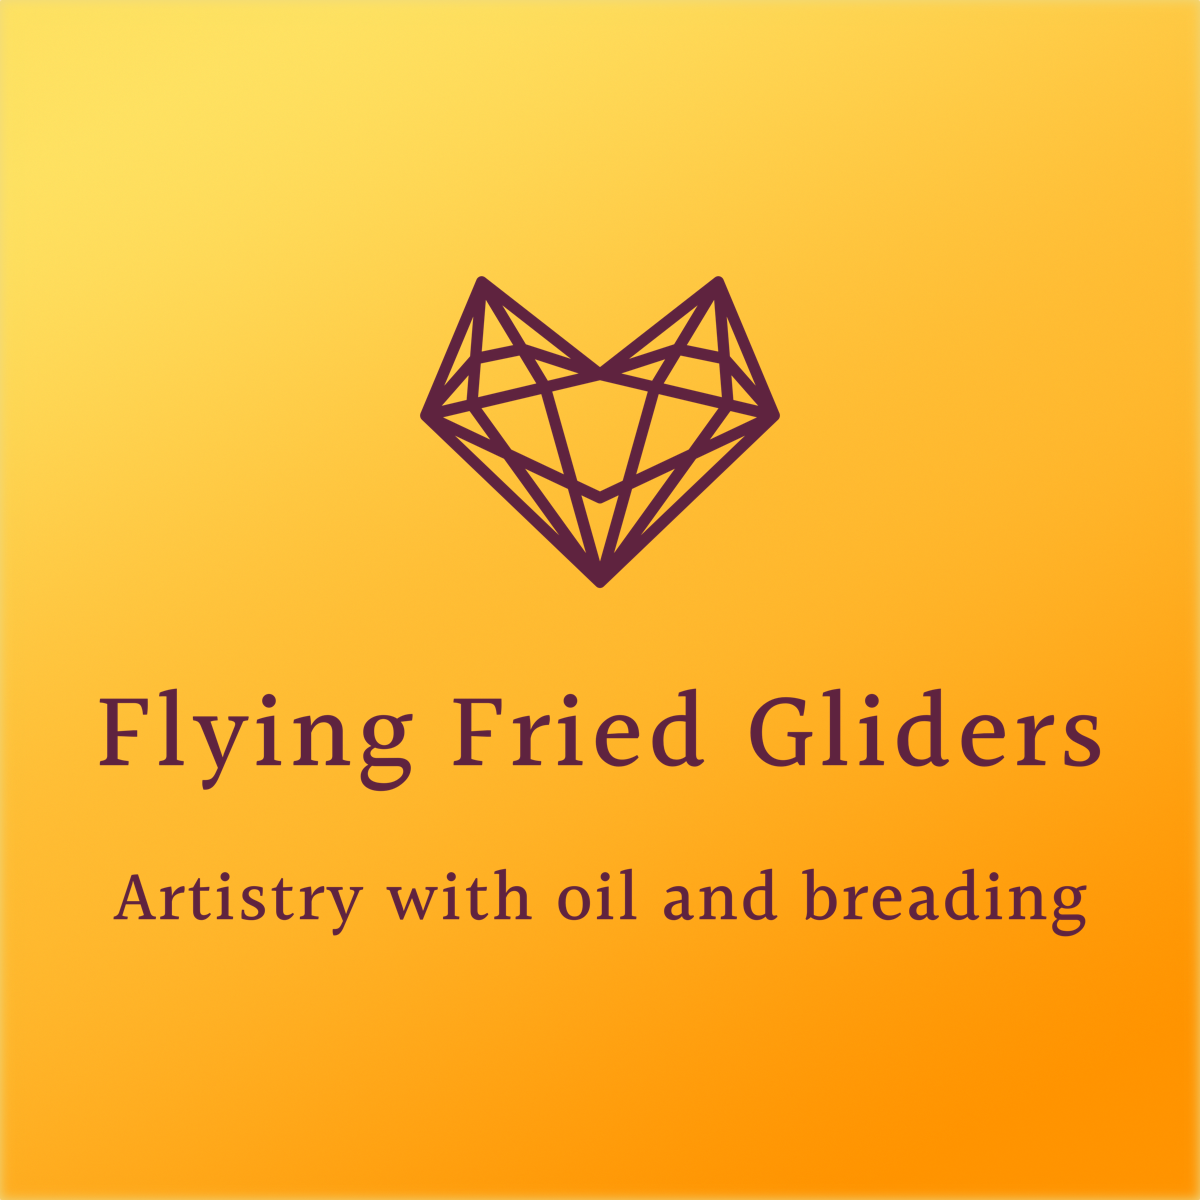 Flying Fried Logo, Artistry with Oil and Breading